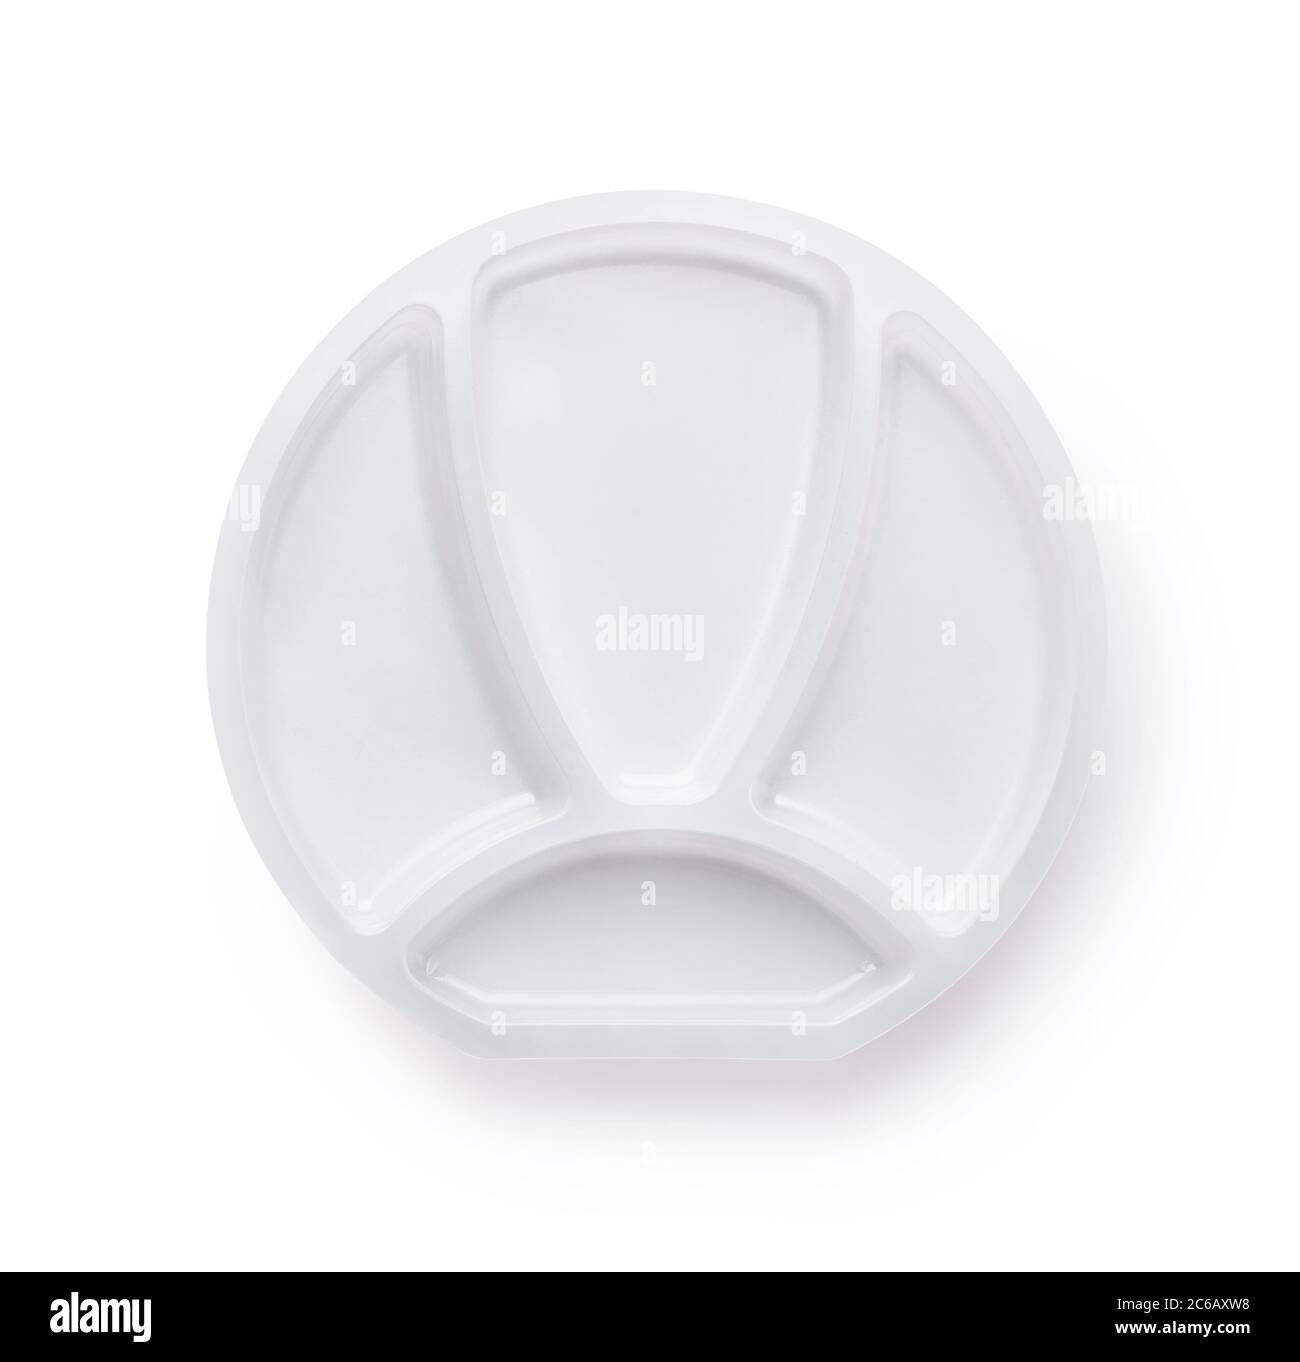 Top view of four compartment white plastic plate isolated on white Stock Photo